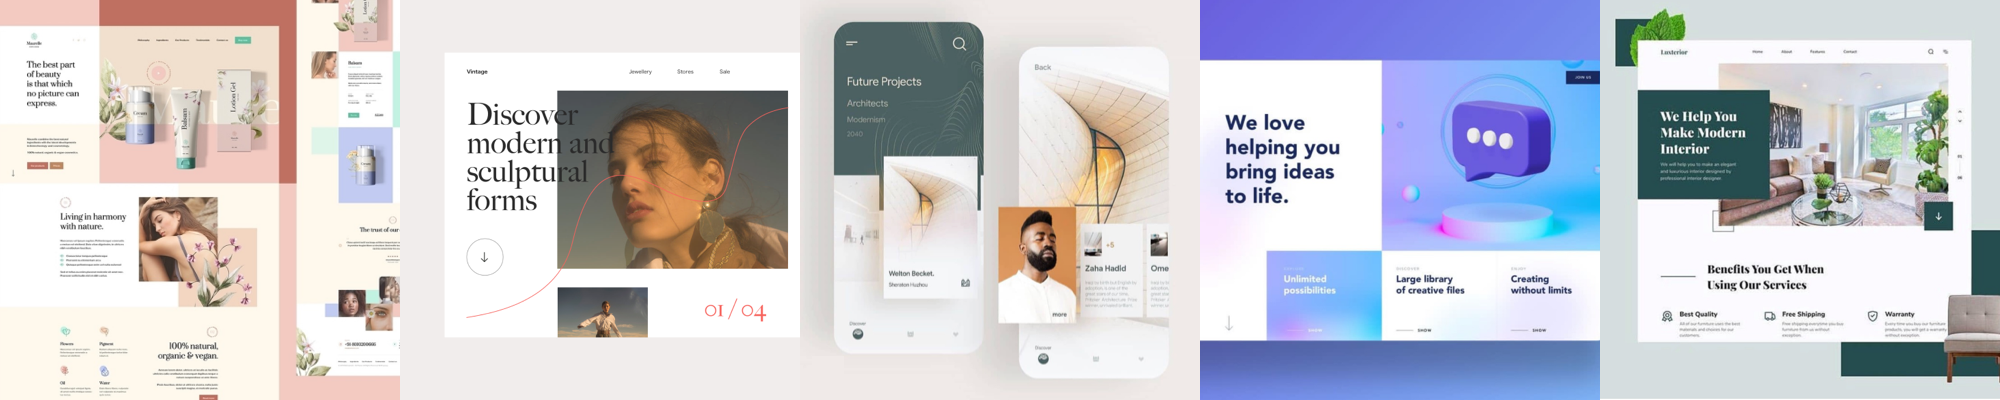 Examples of geometric structure in UI